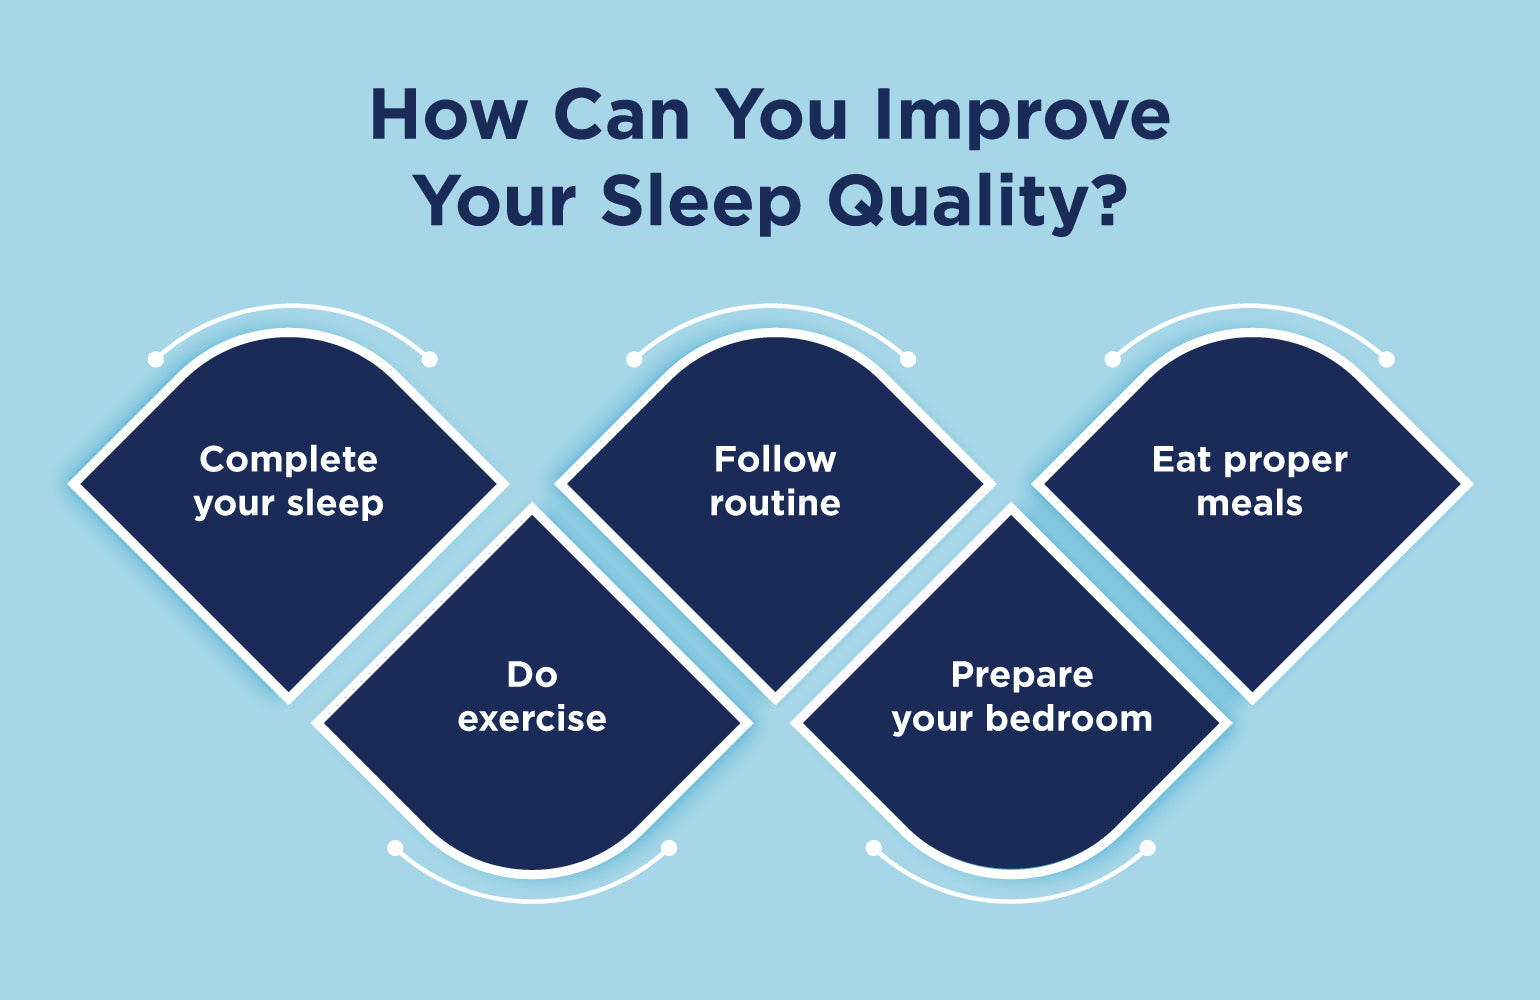 How Can You Improve Your Sleep Quality?